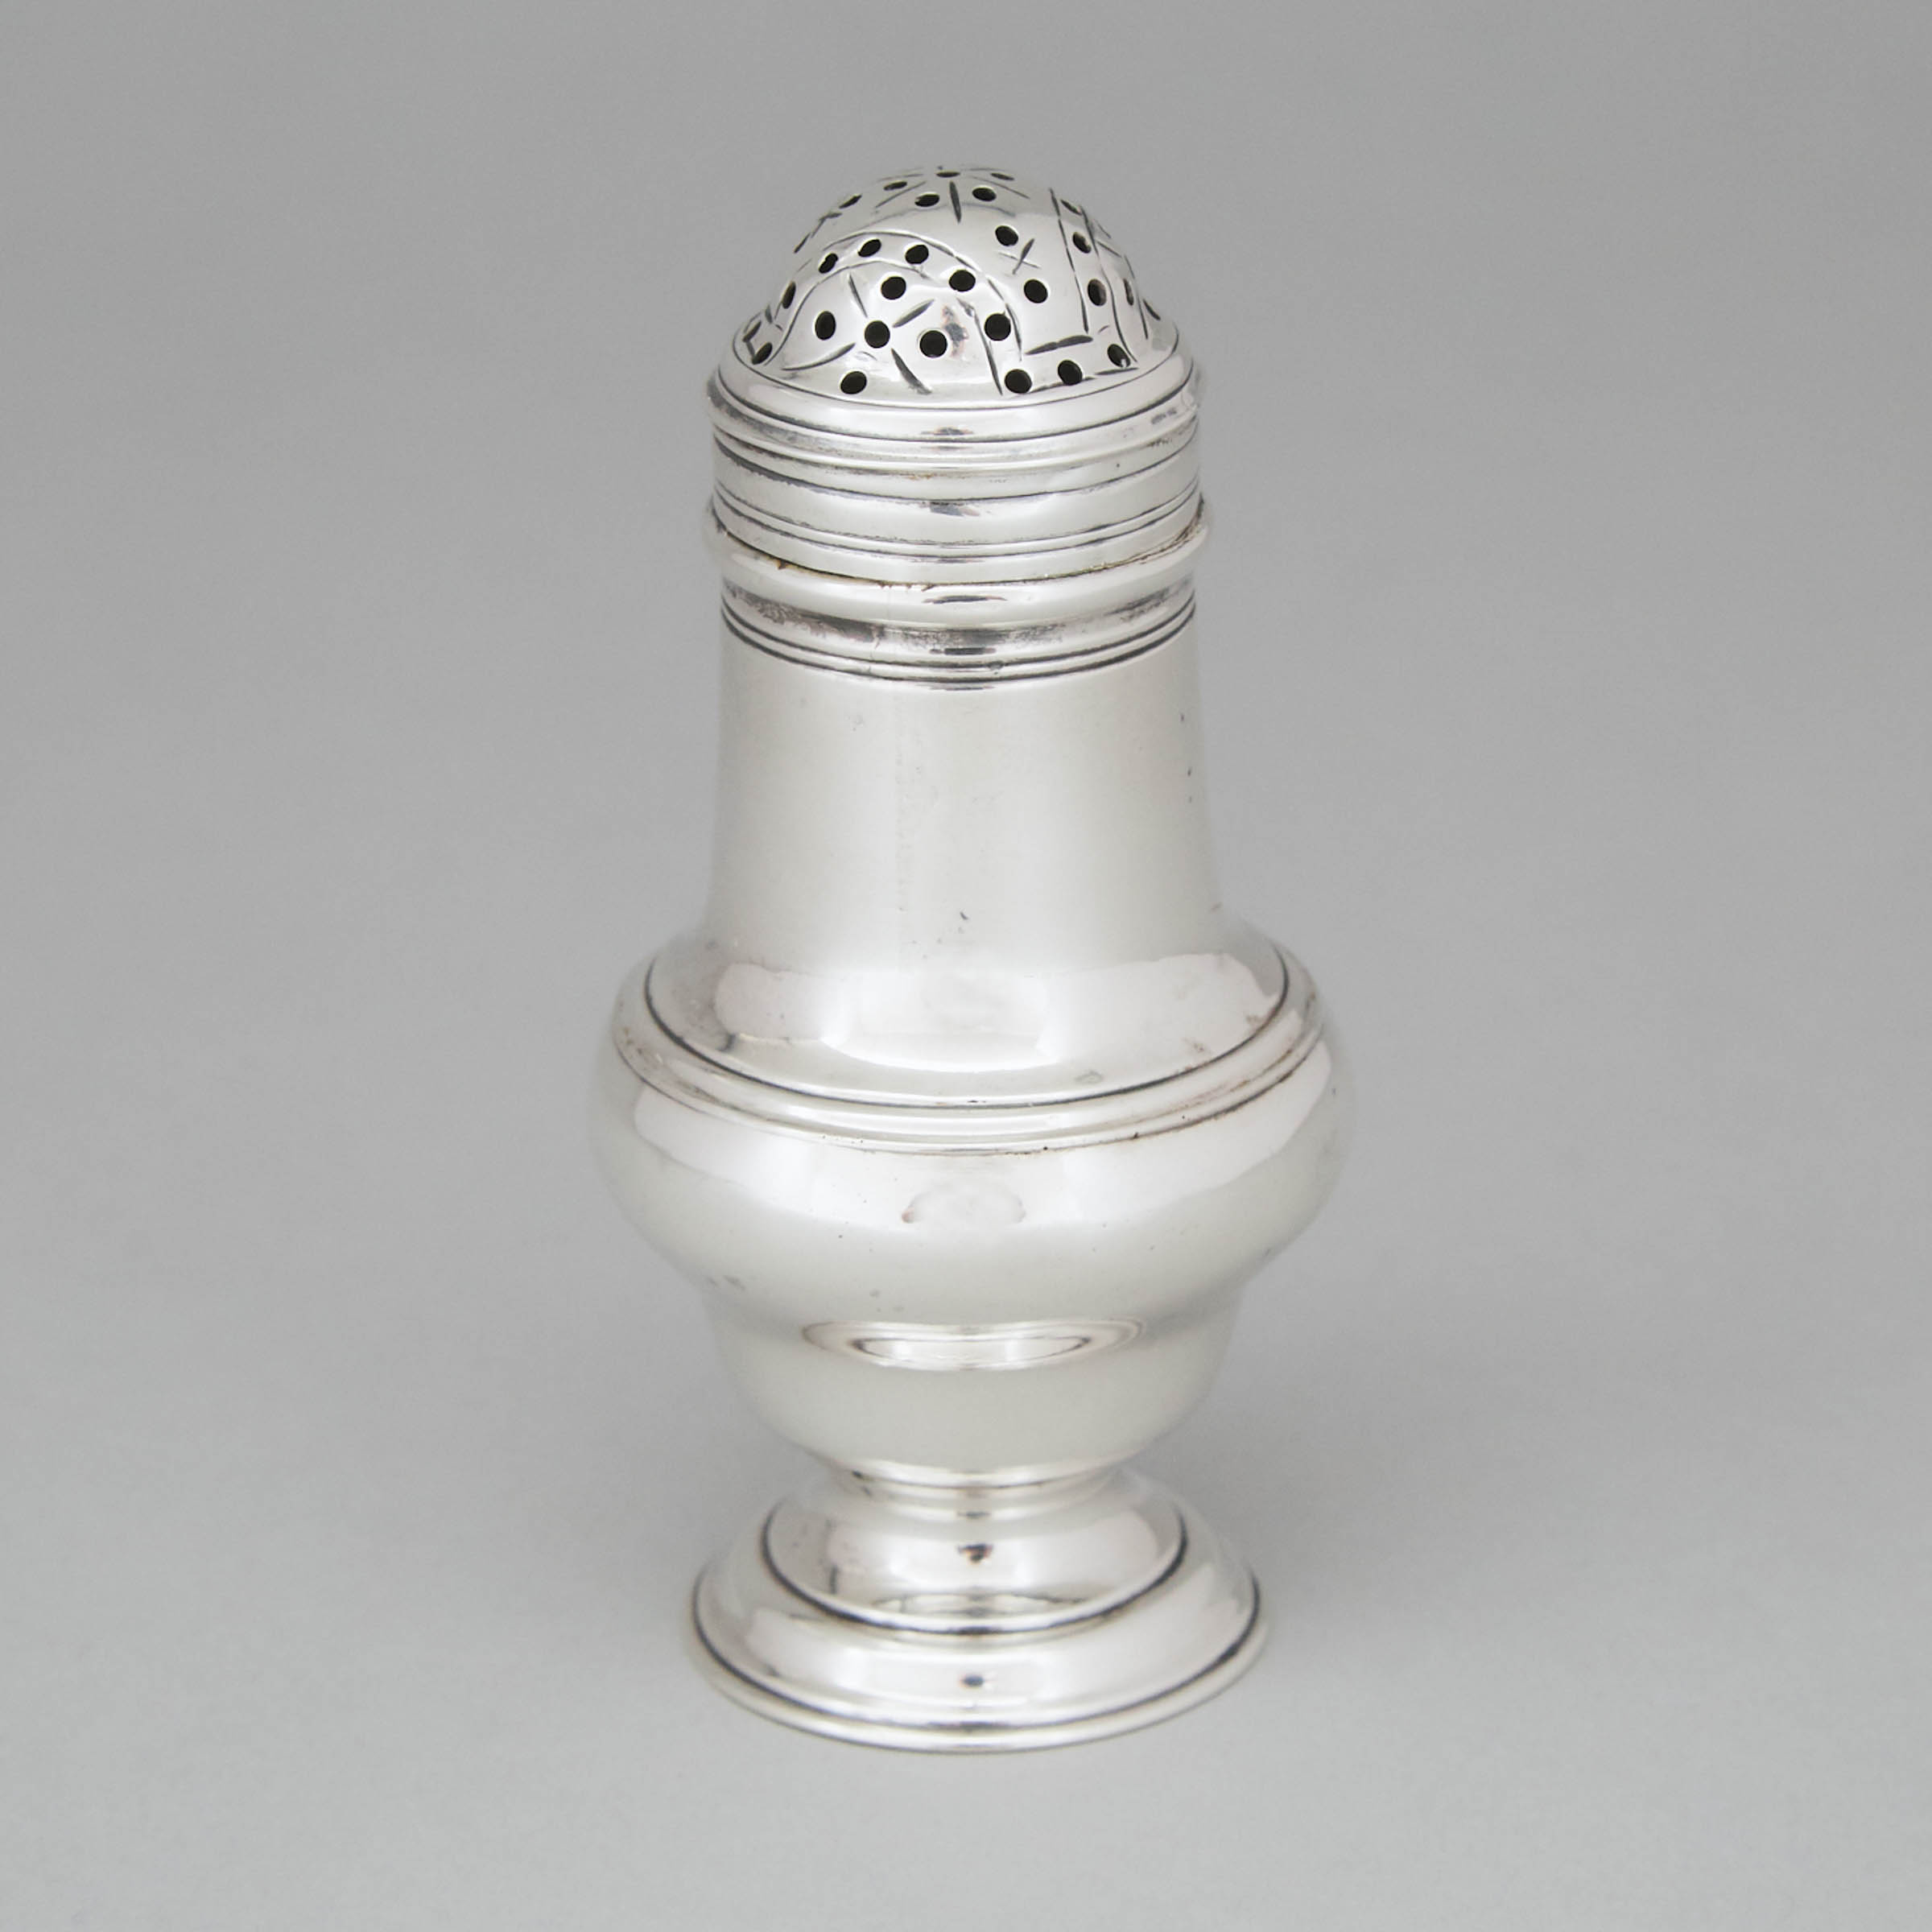 George III Silver Bun-Topped Baluster Caster, London, 1766